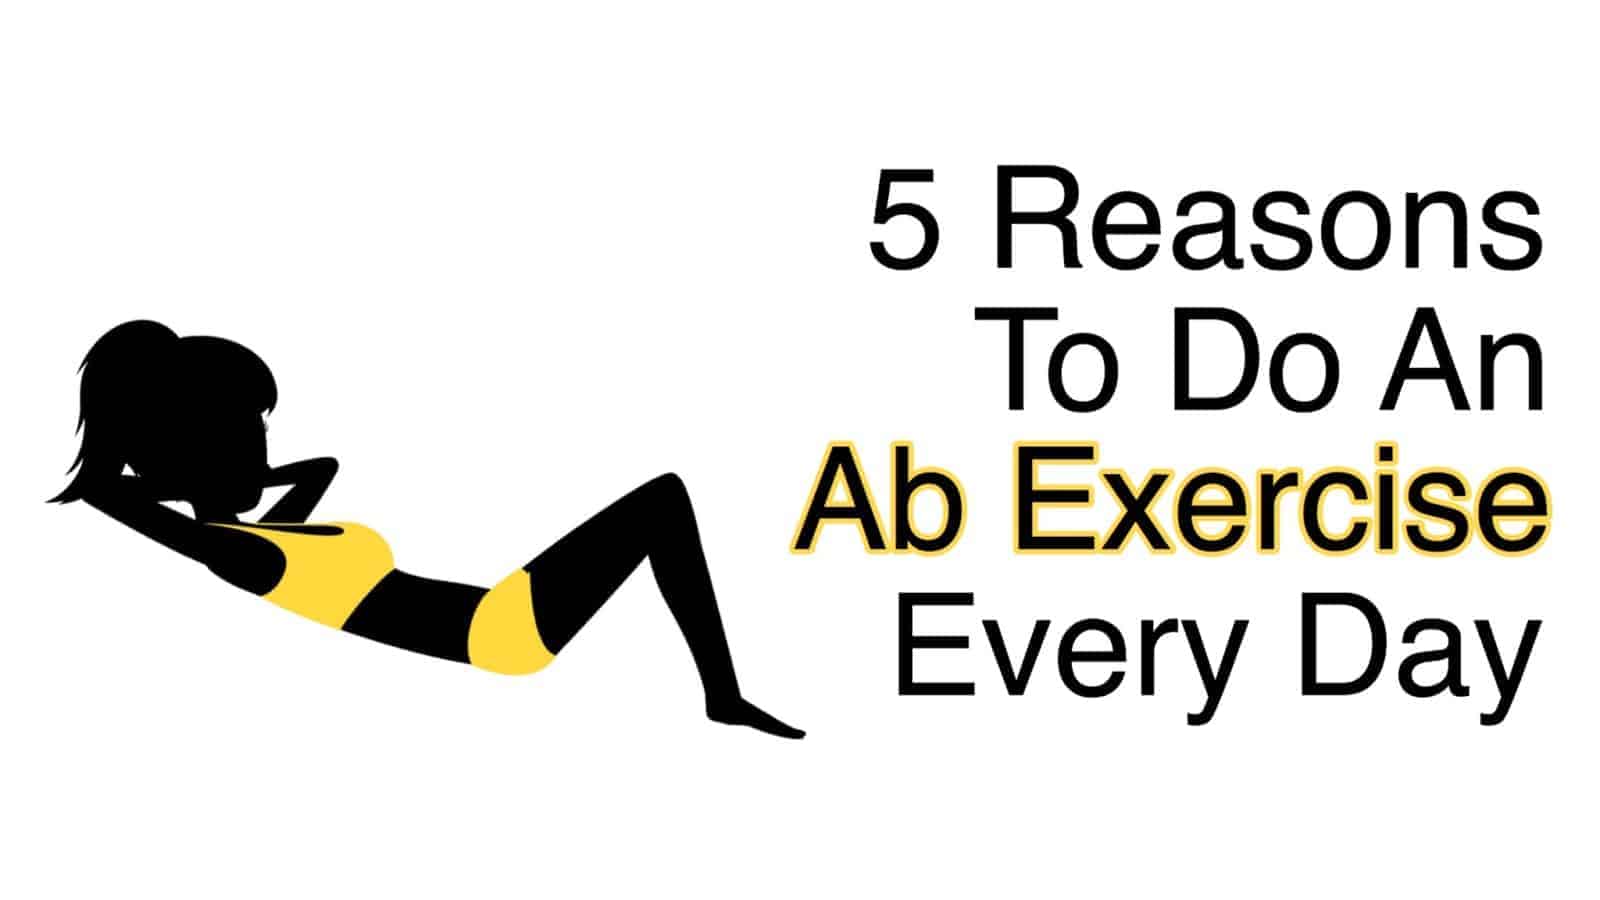 5 Reasons To Do An Ab Exercise Every Day